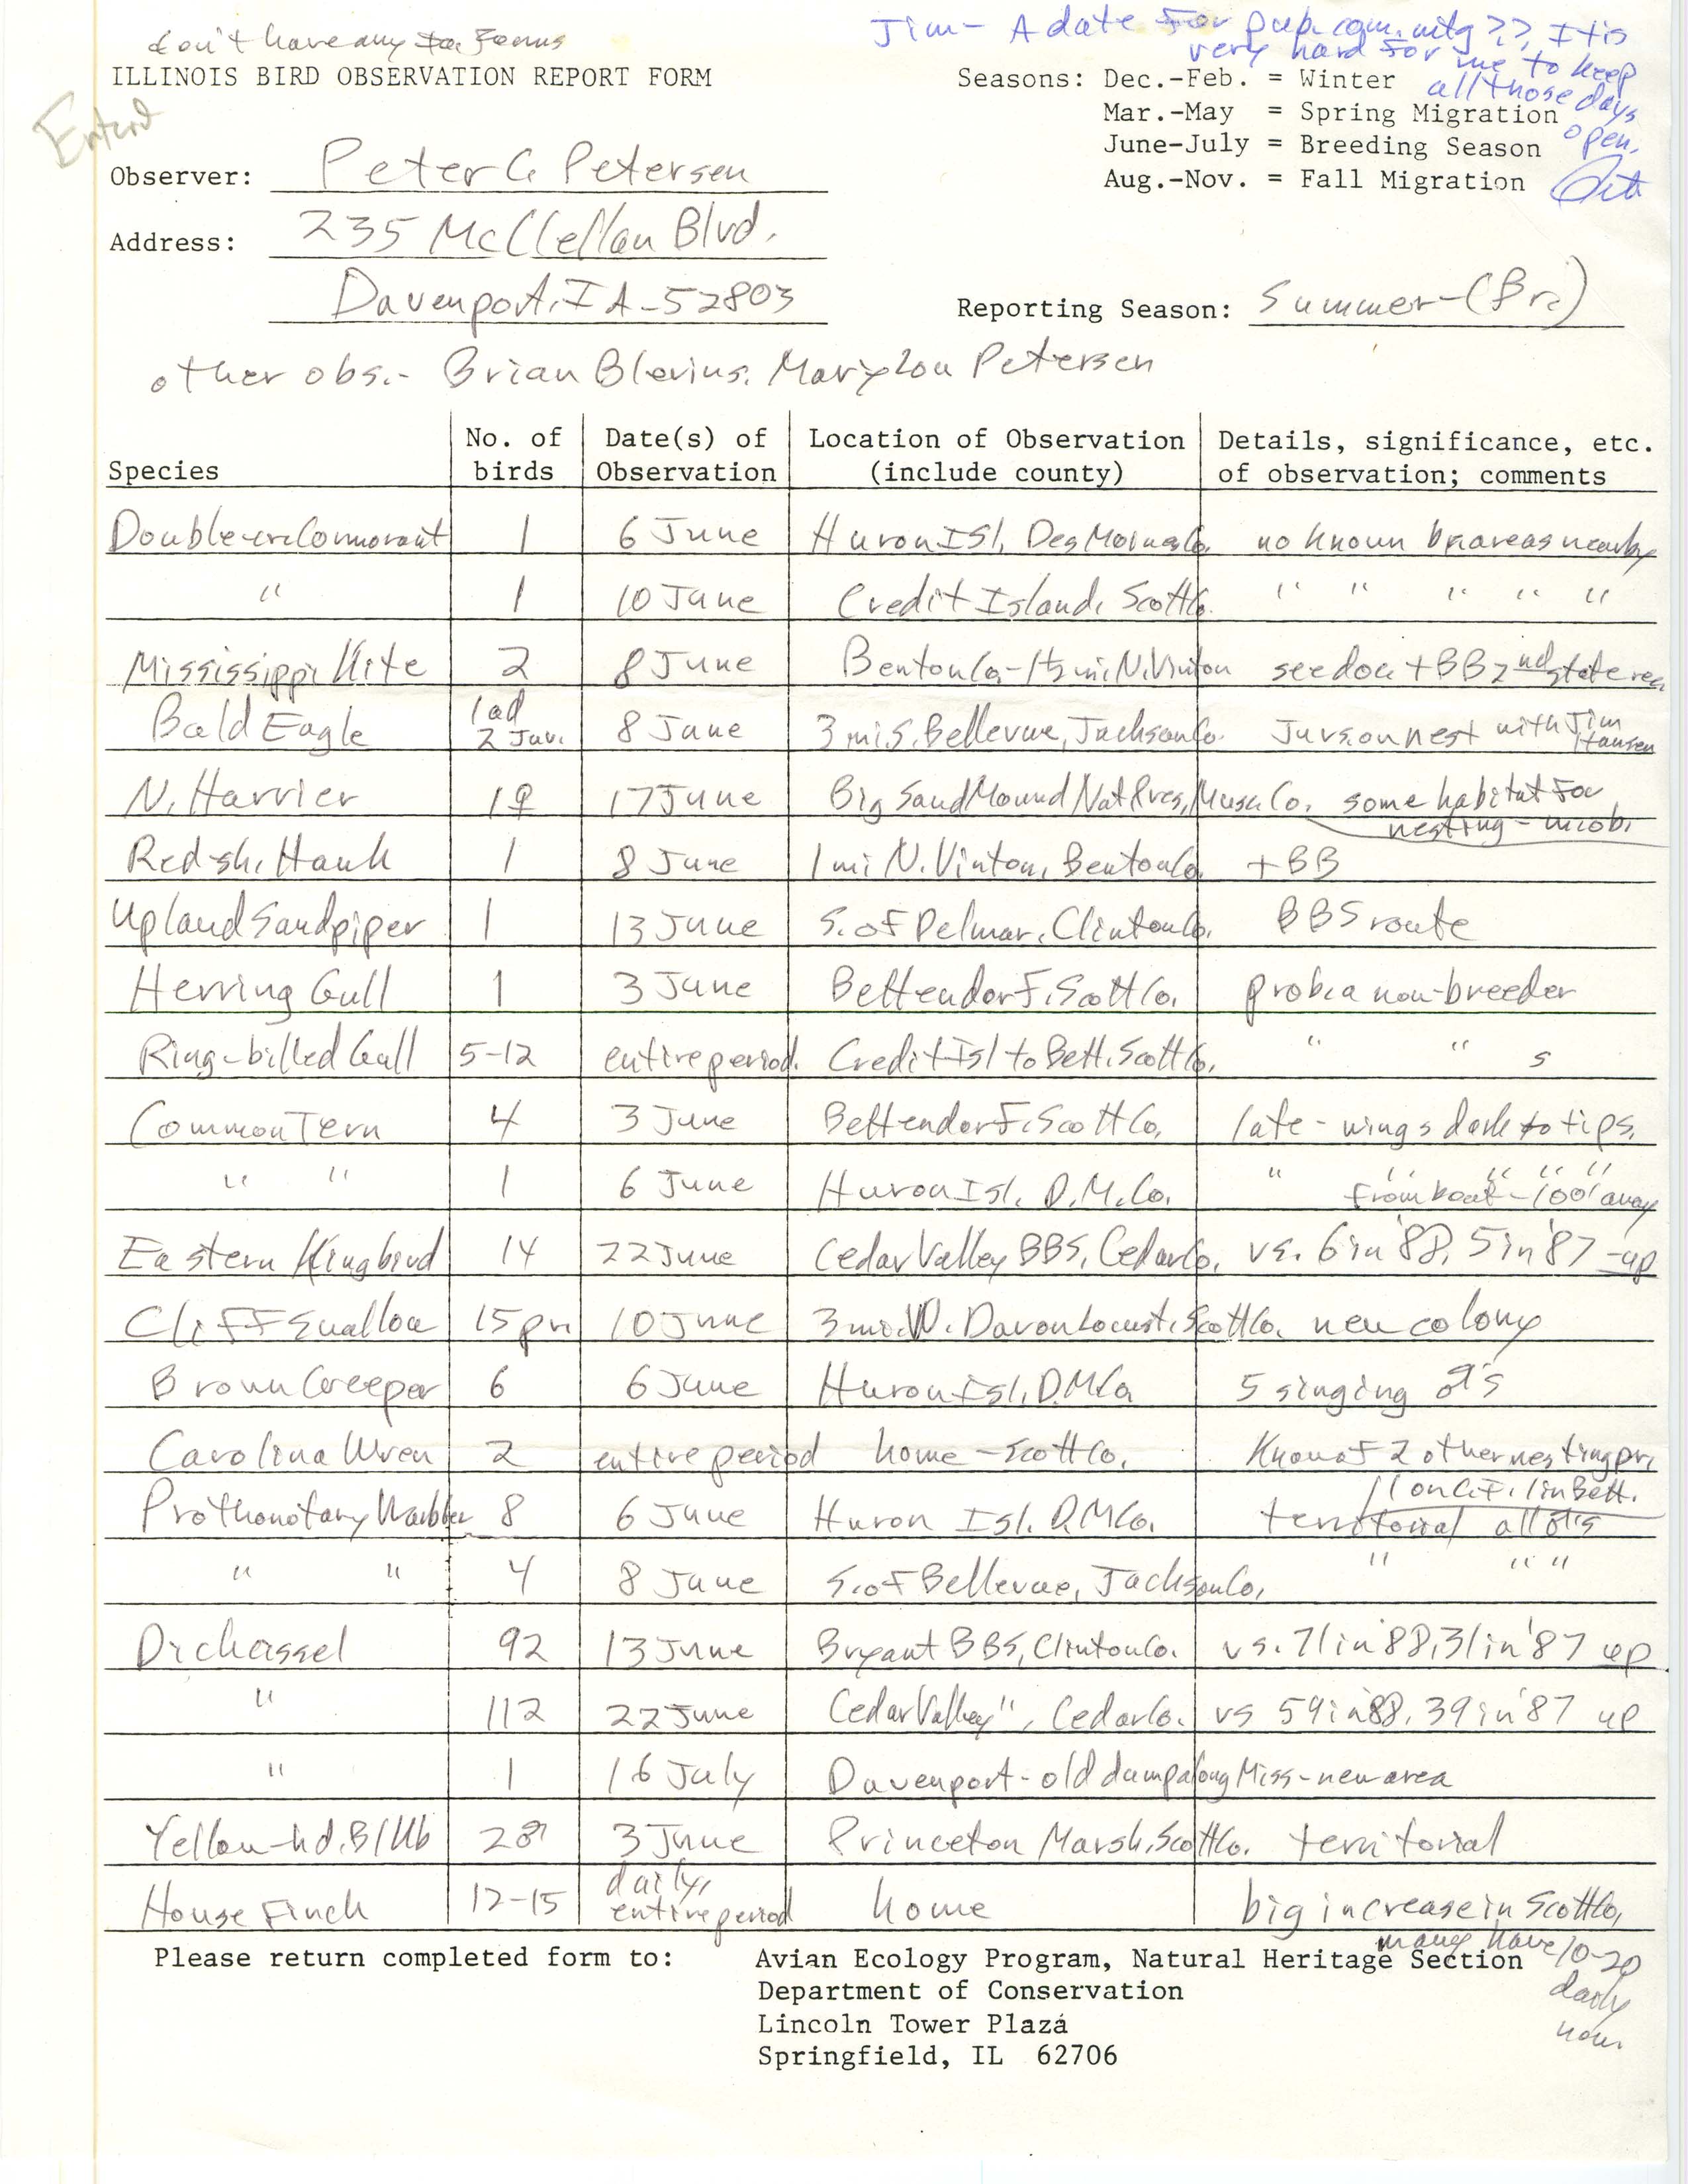 Field notes contributed by Peter C. Petersen, summer 1989